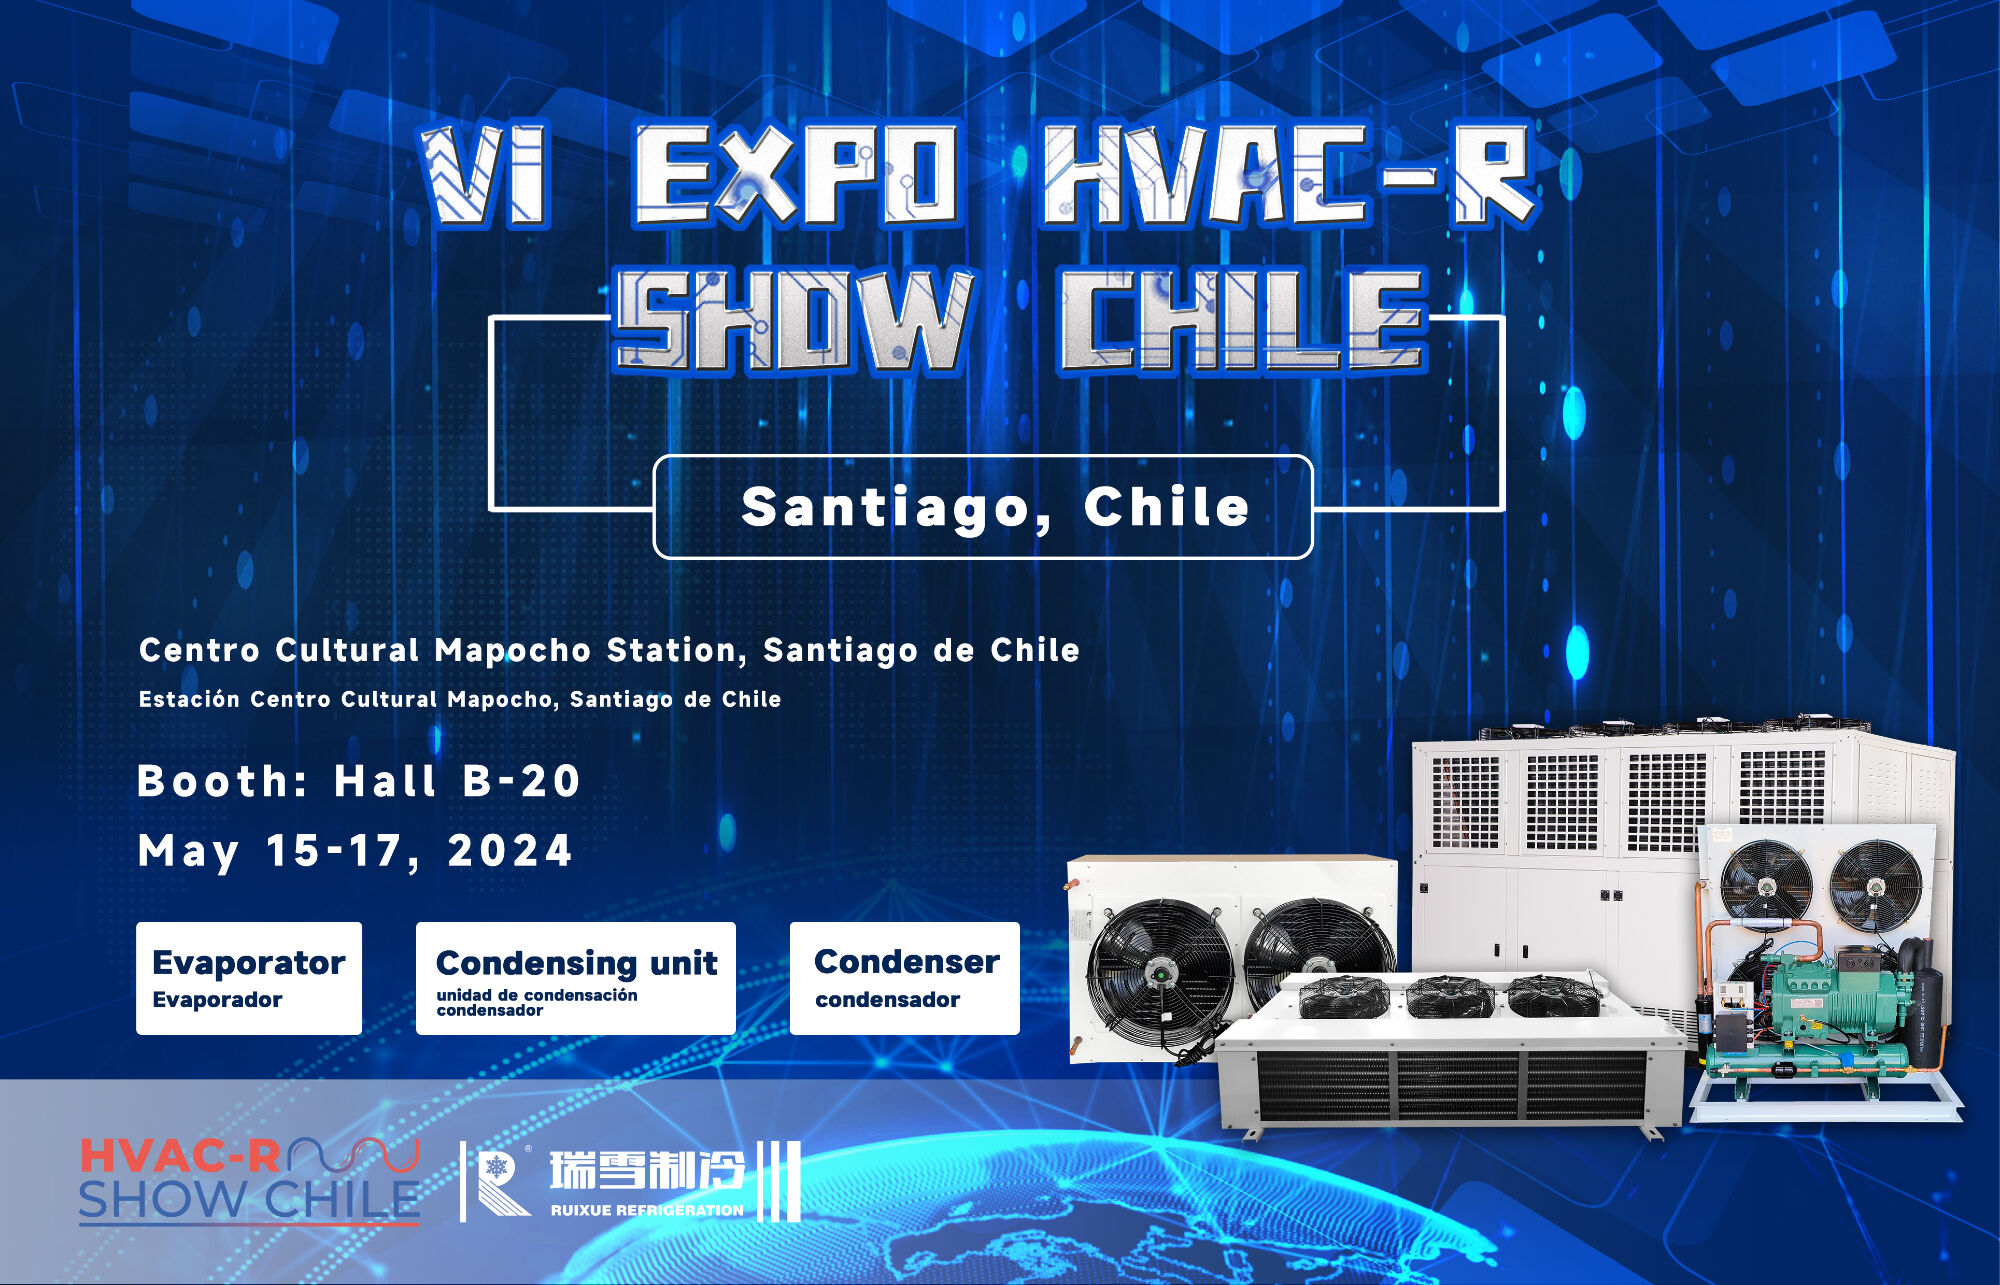 We'll meet in Chile in May